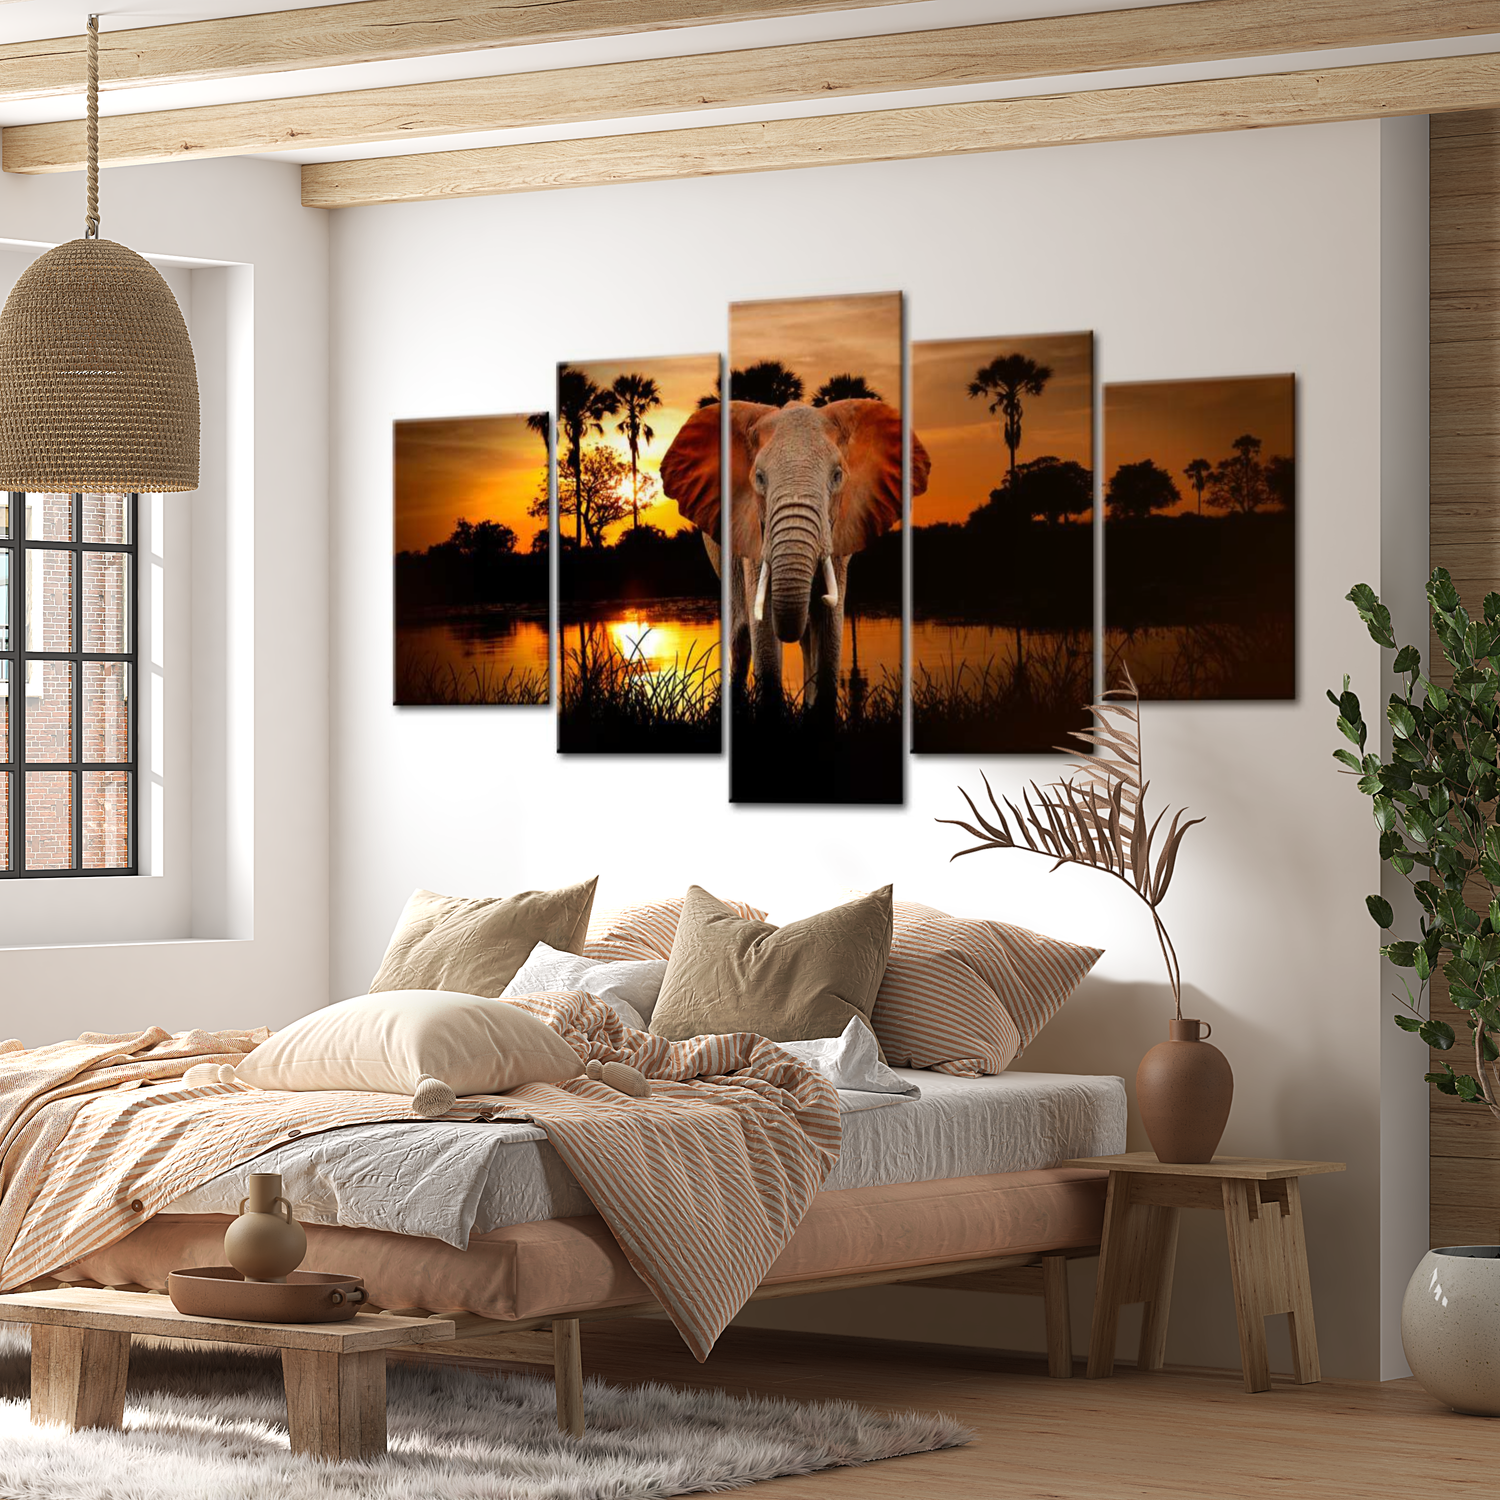 Stretched Canvas Animal Art - Elephant At Sunset 40"Wx20"H